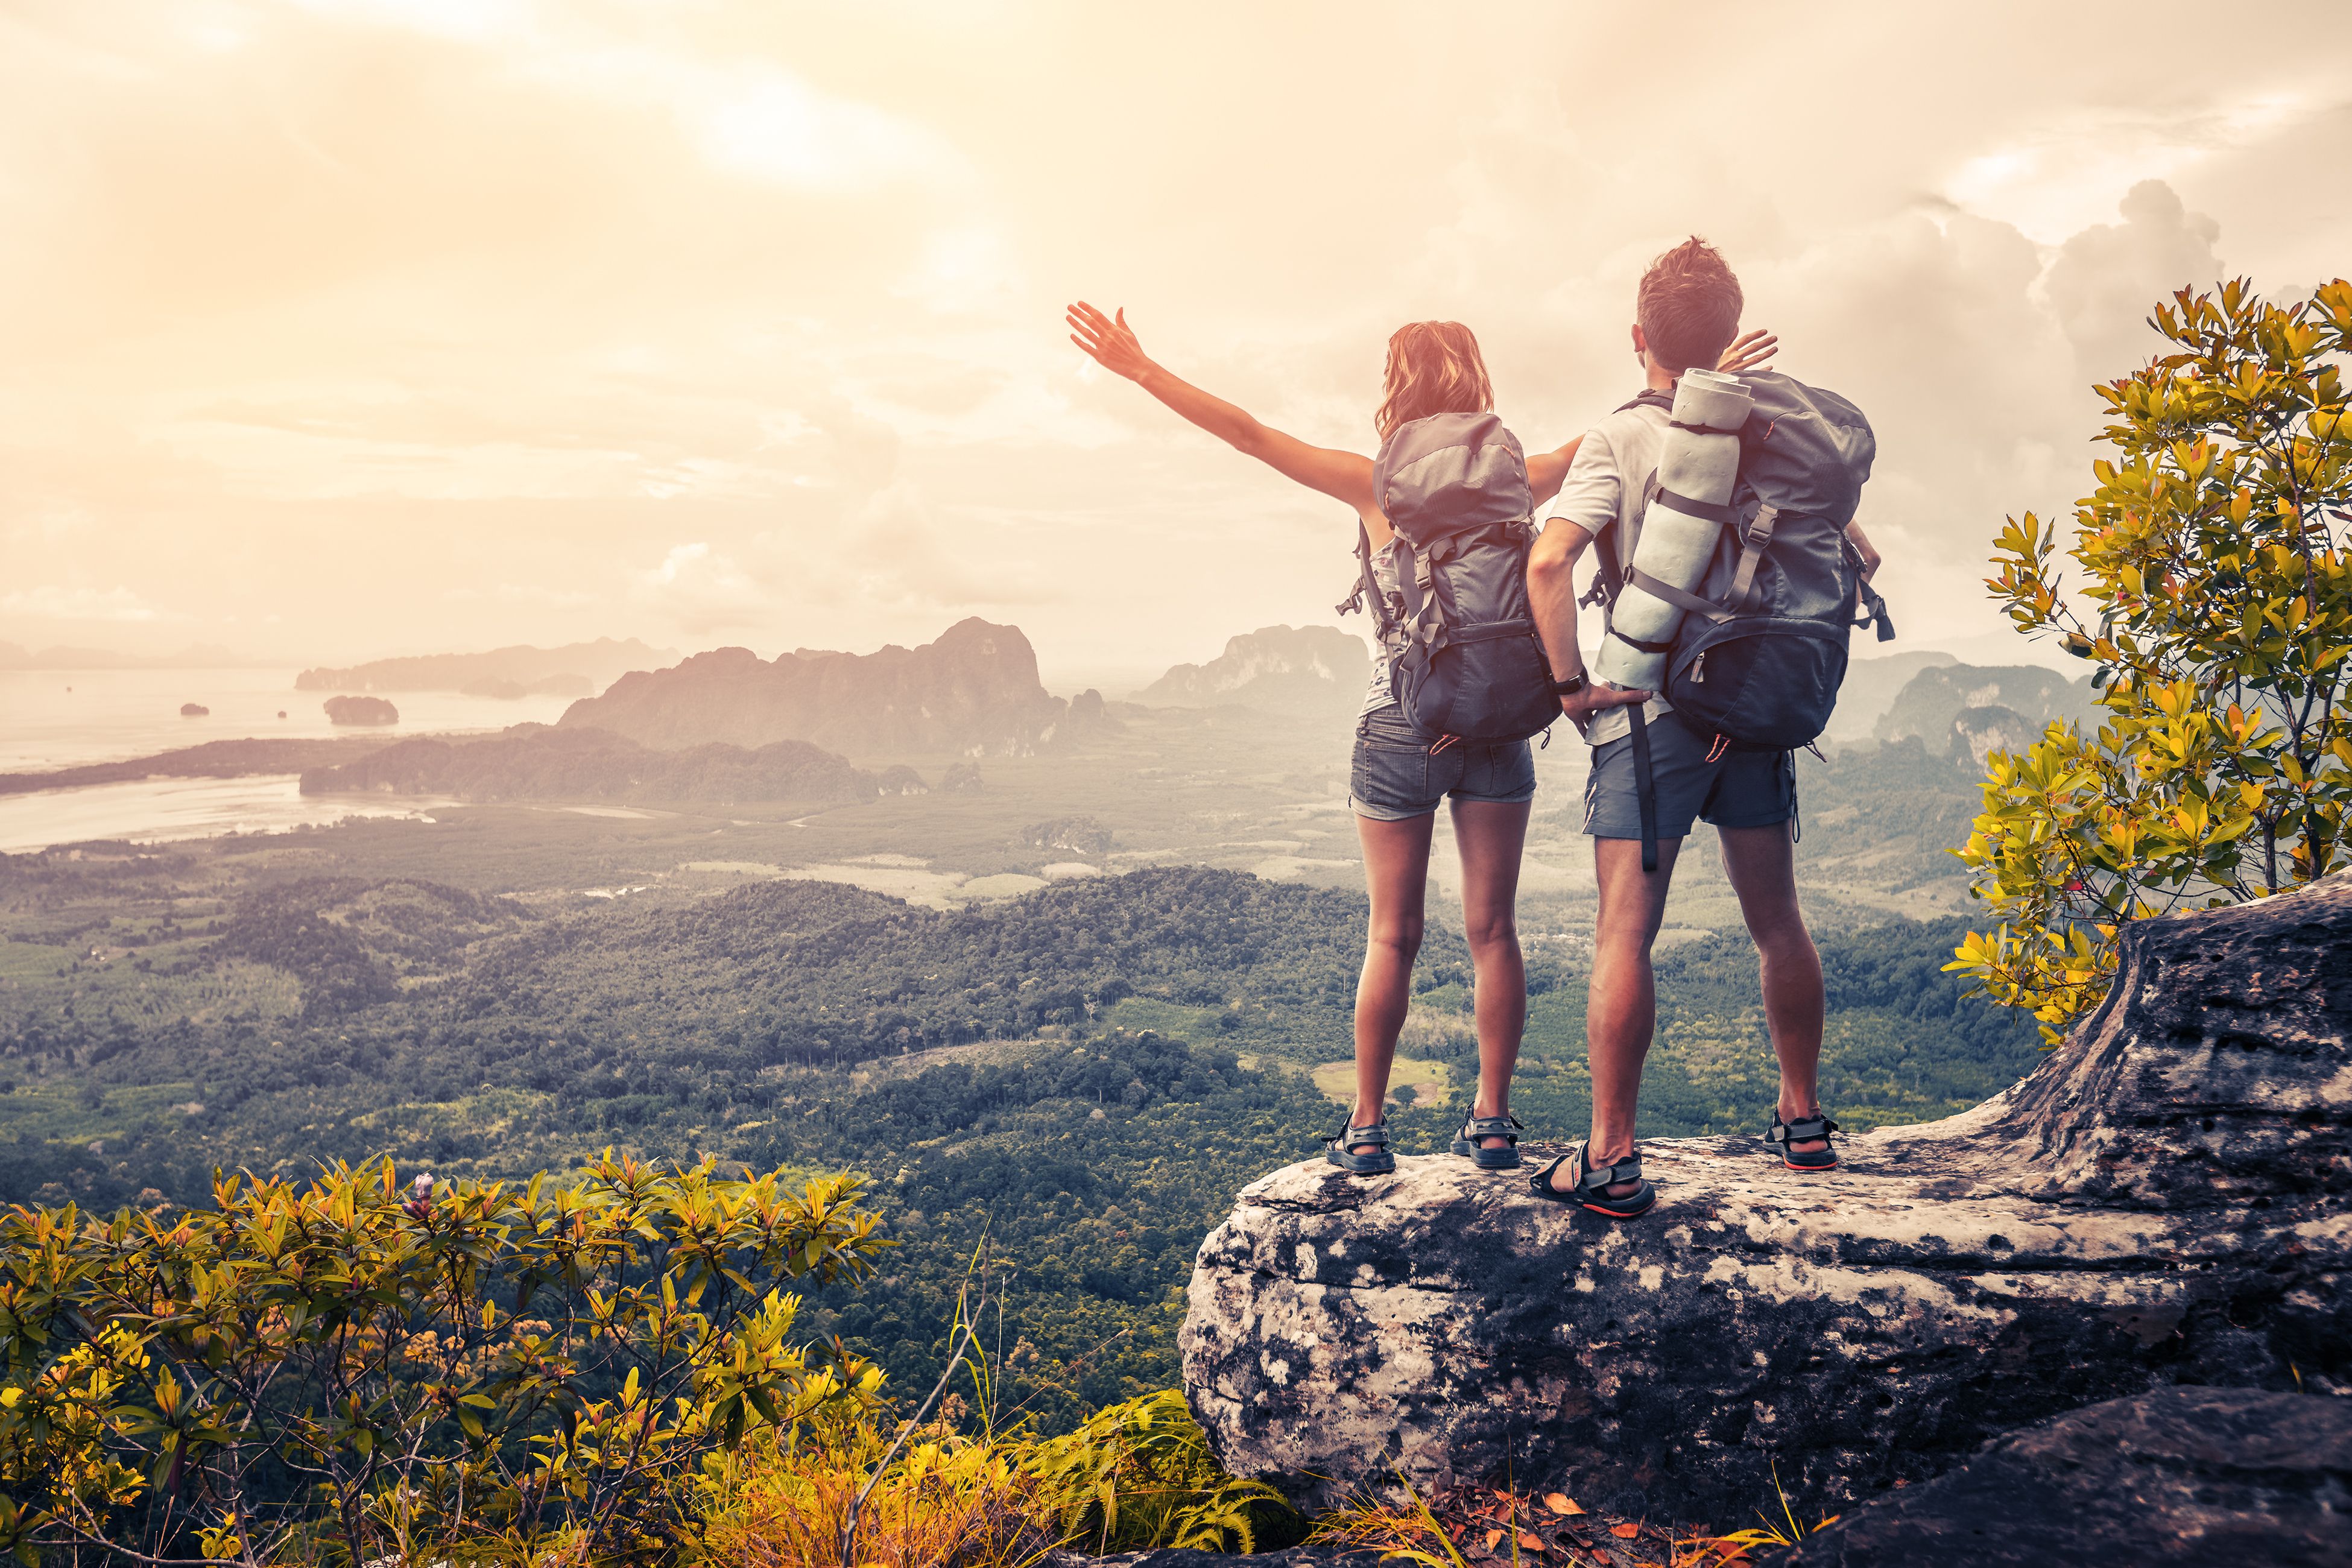 A couple on an adventure hiking up the mountains. | Source: Shutterstock